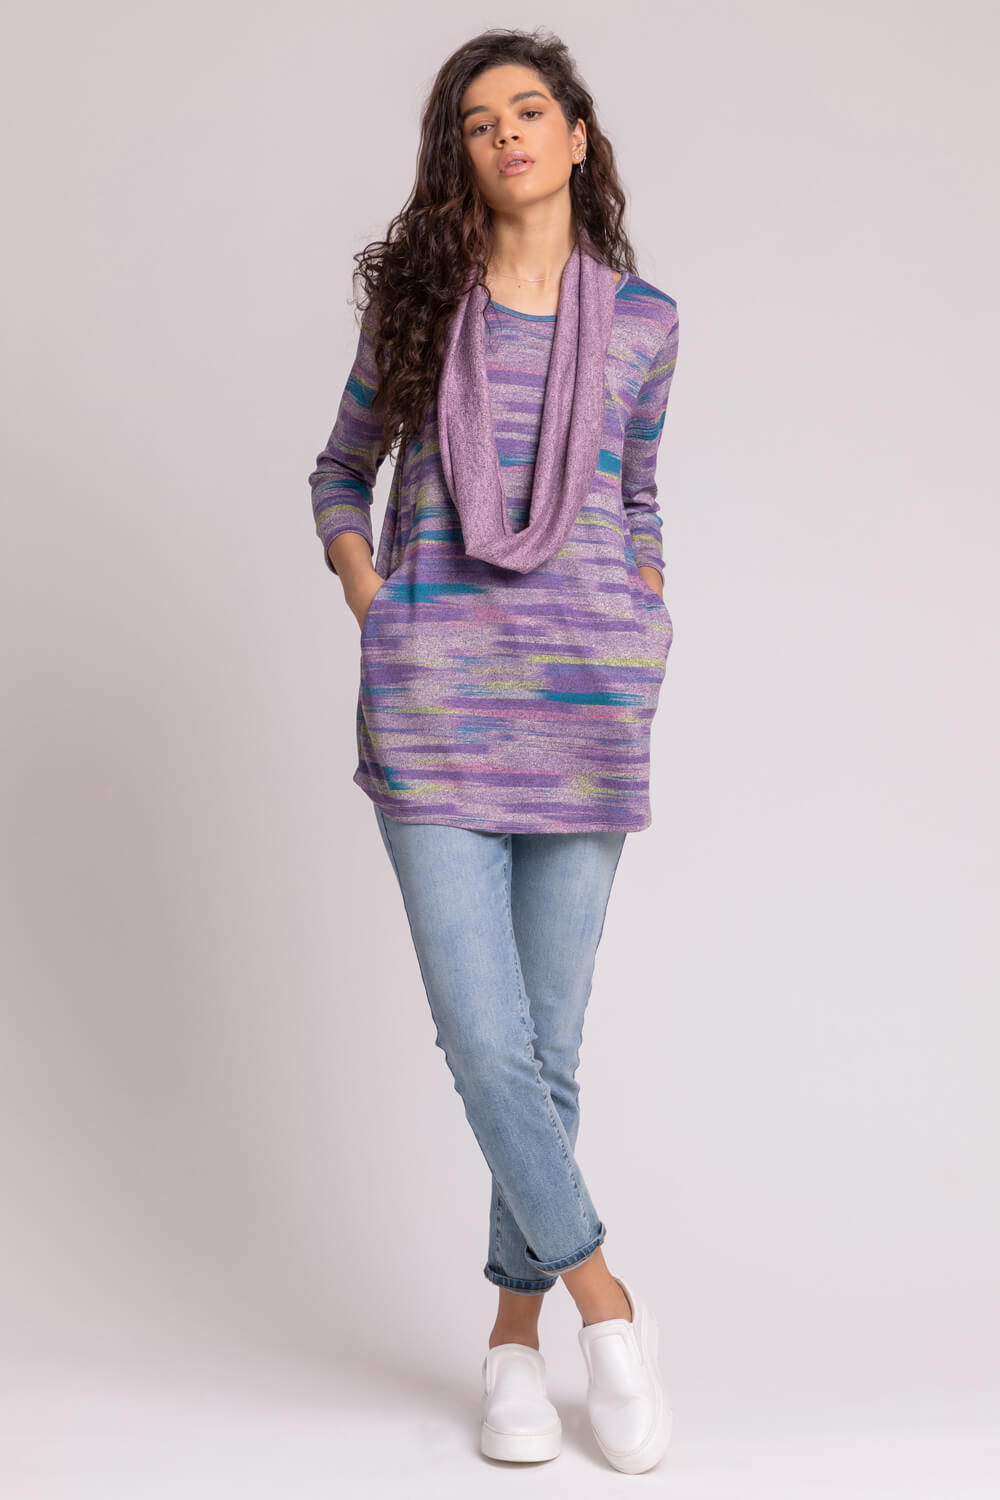 Lilac Abstract Print Pocket Top with Snood, Image 3 of 4